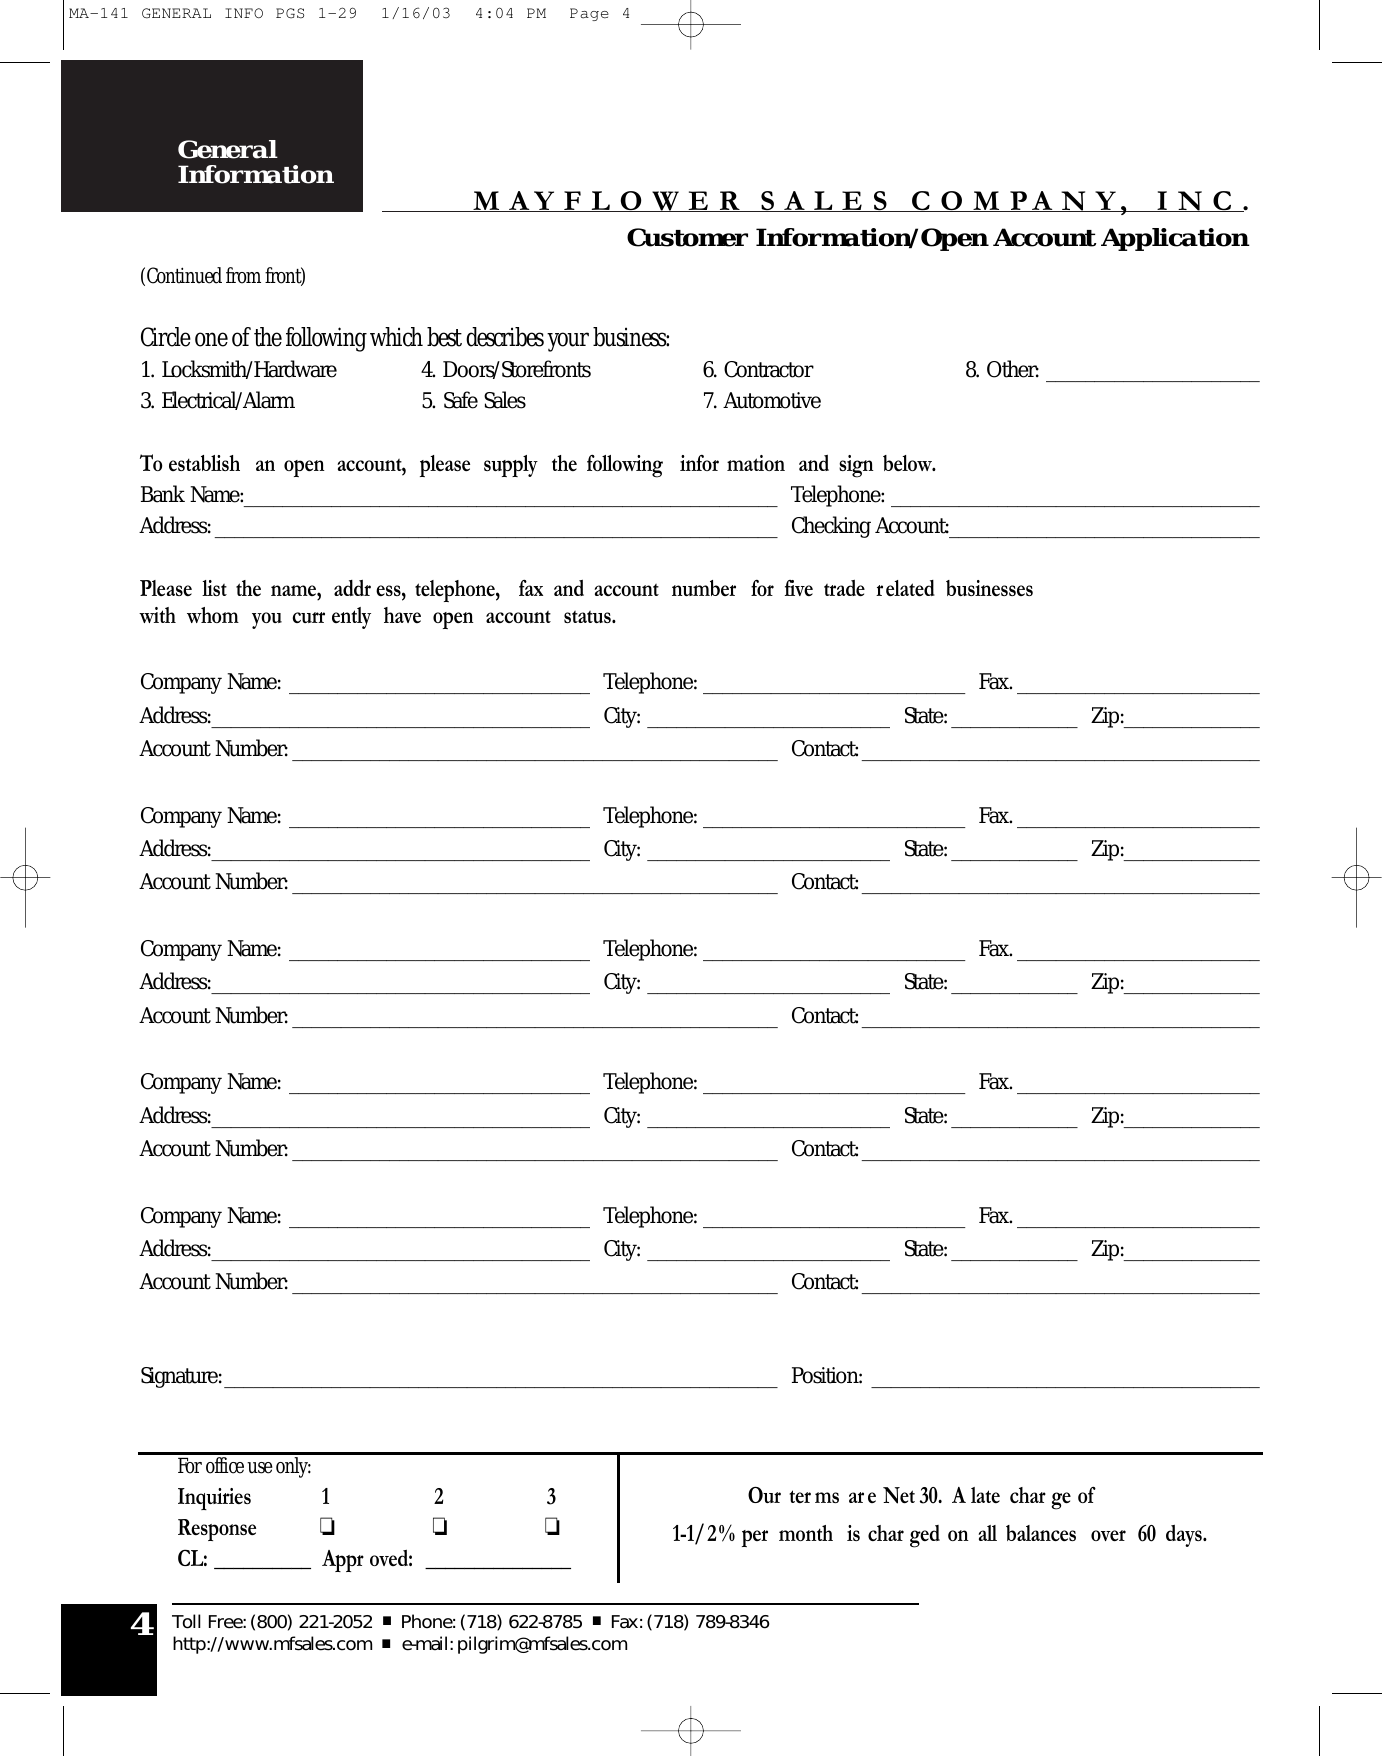 Page 2 of 2 - Locks MA-141 GENERAL INFO PGS 1-29 Customer Information/Open Account Application 3-4a